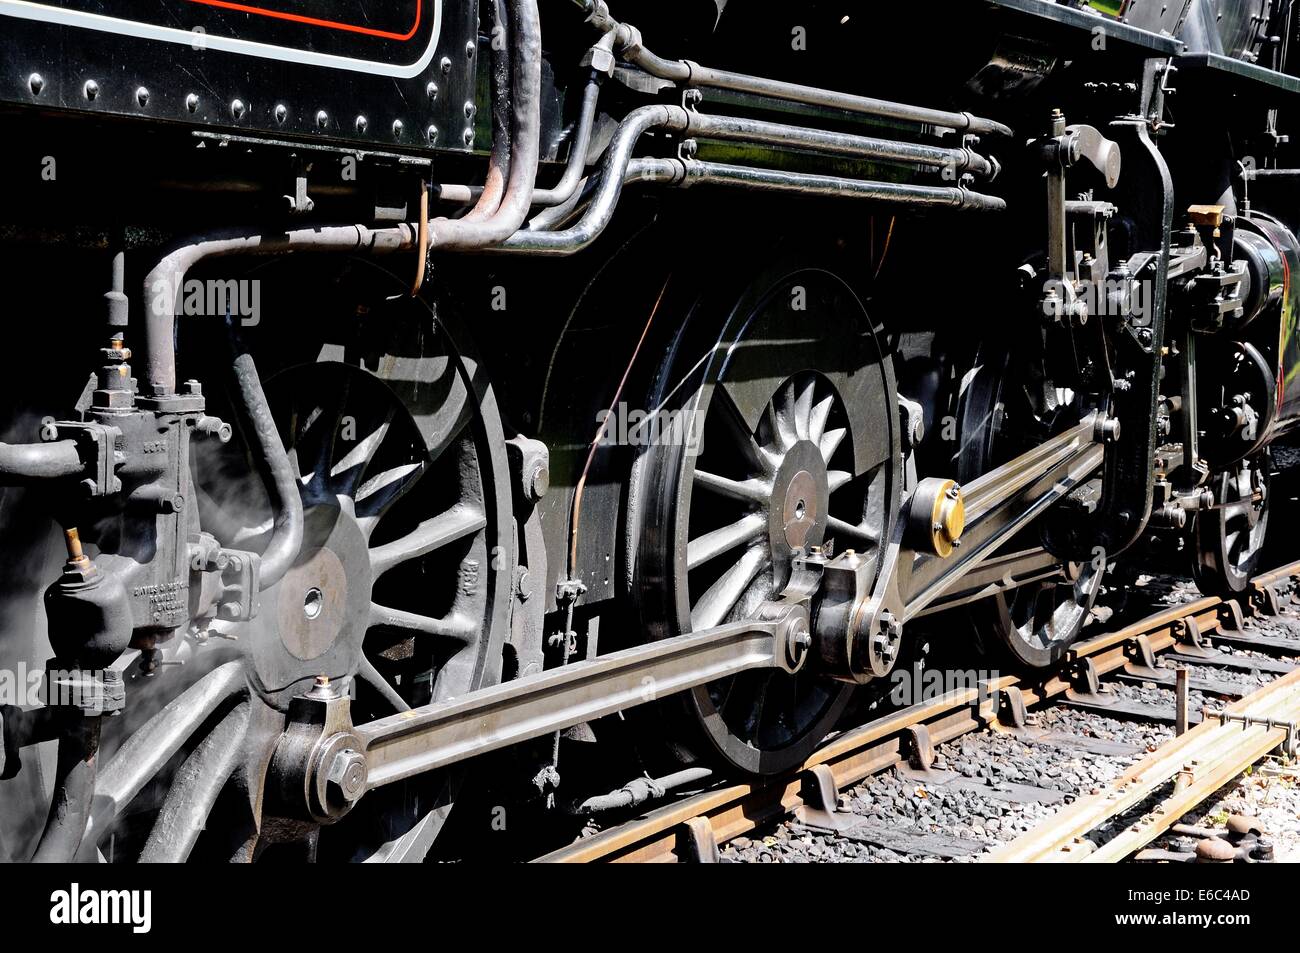 Steam Locomotive Ivatt Class 4 2-6-0 number 43106showing the main driving wheels and Walschaerts valve gears. Stock Photo